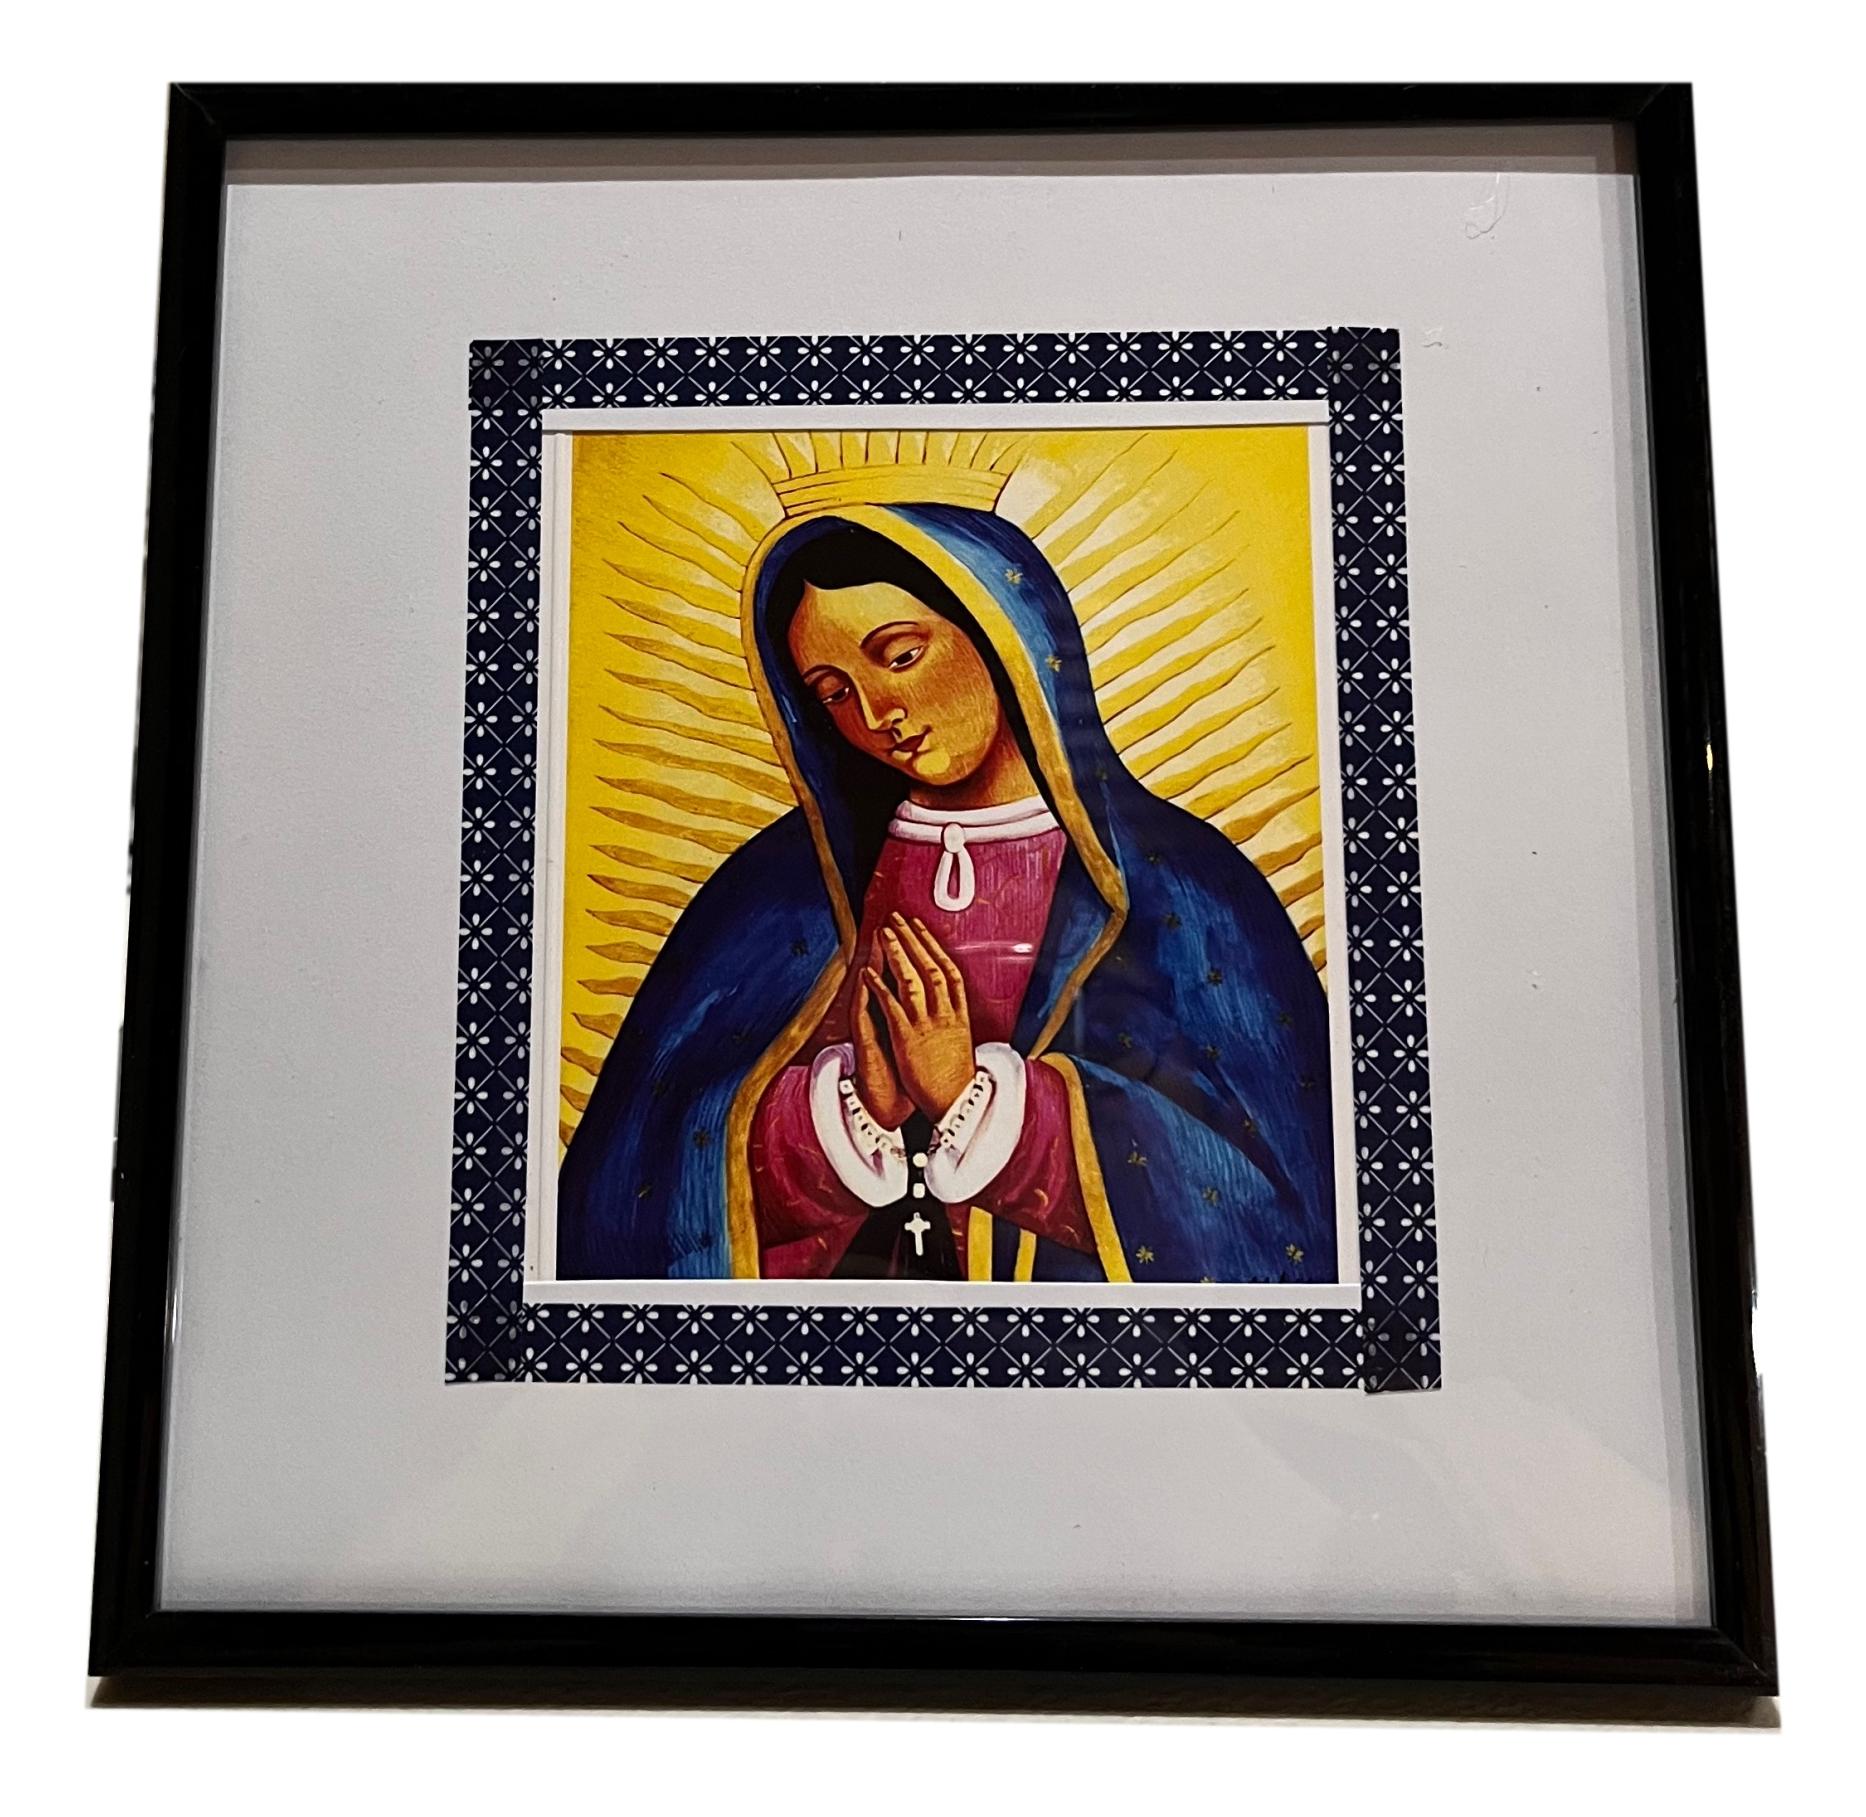 Art Frame Reproduction Of Our Lady Of Guadalupe Frame By El Paso Artist Maria 9 inches Height By 9 inches Width - Ysleta Mission Gift Shop- VOTED El Paso's Best Gift Shop